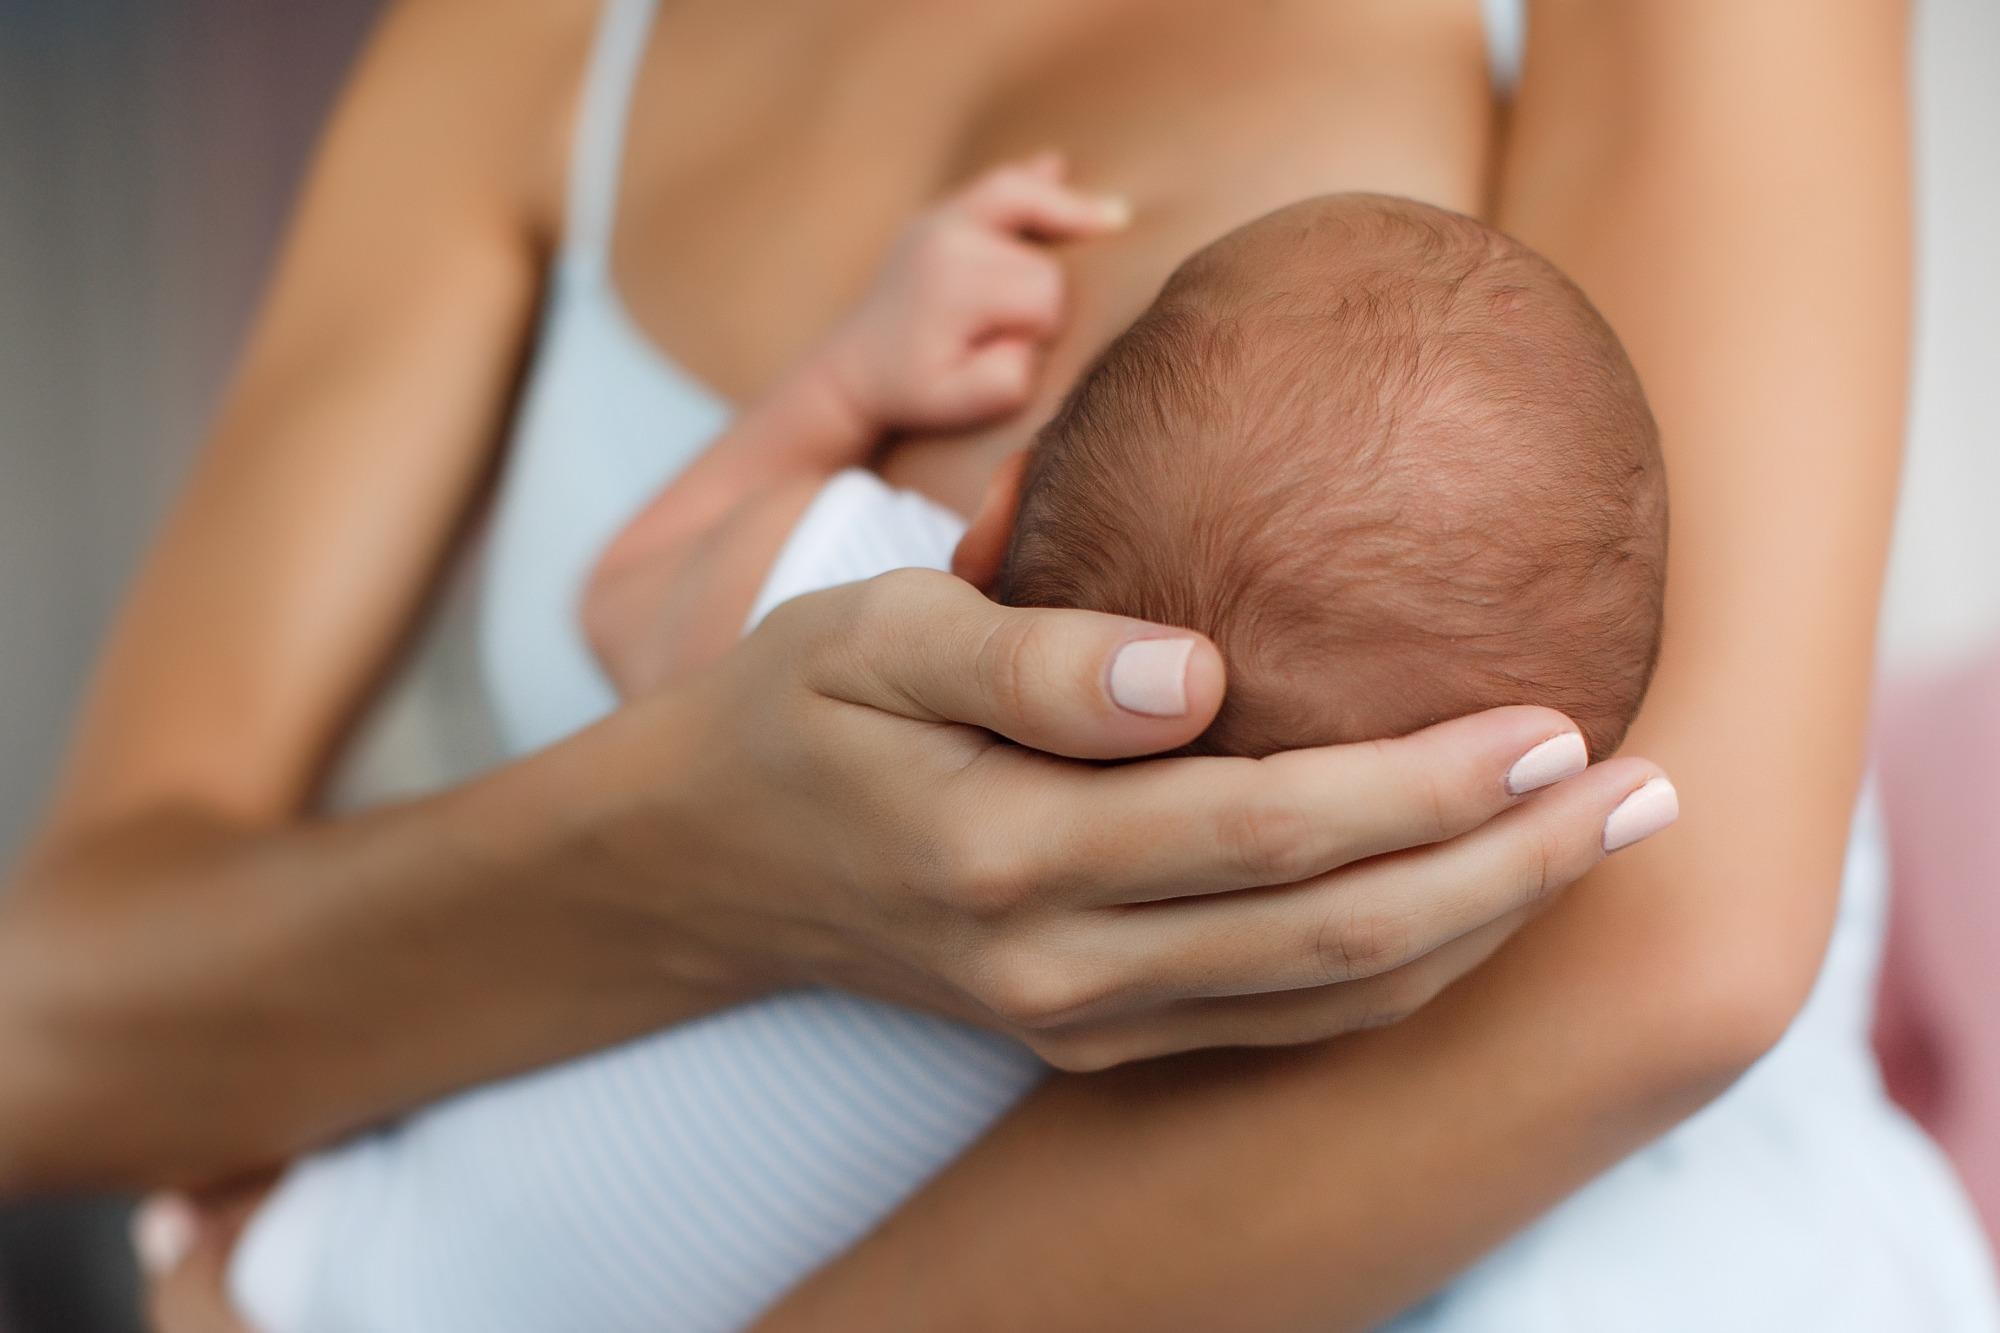 Study: Maternal Mental Health and Breastfeeding amidst the Covid-19 Pandemic: outcomes in a Catalan cohort. Image Credit: HTeam / Shutterstock